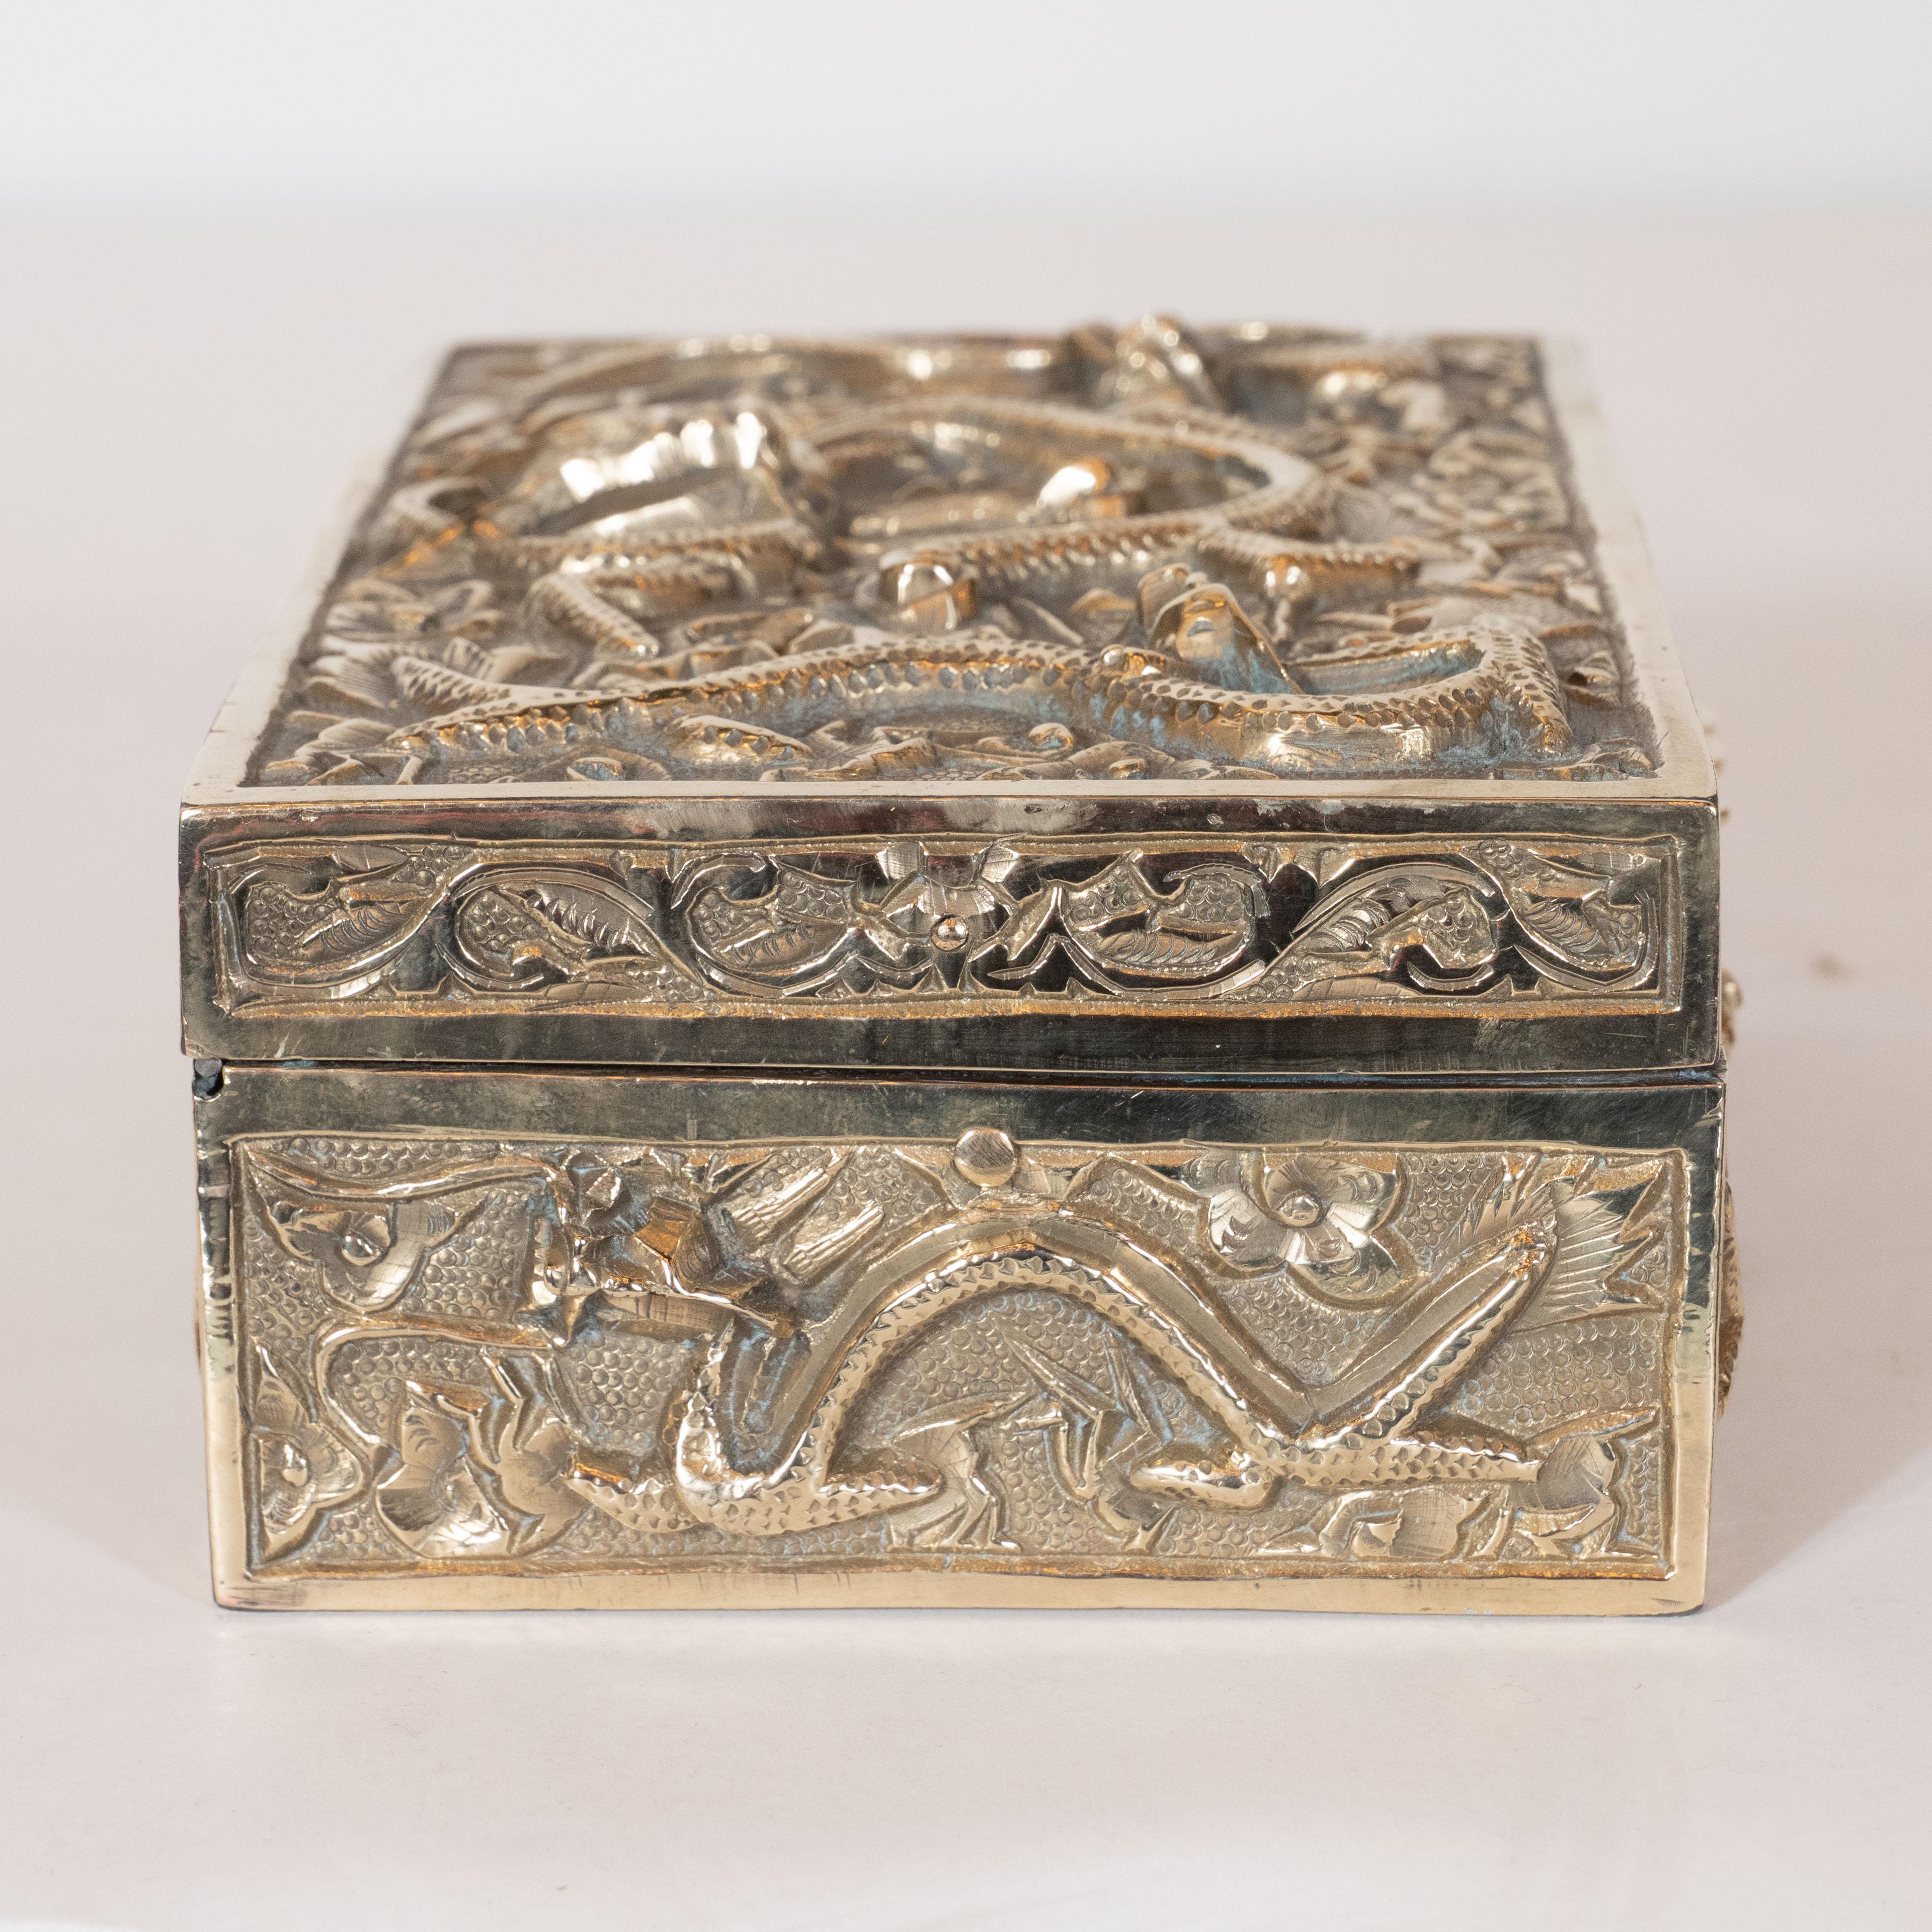 Art Deco Brass Rectangular Decorative Box with Dragon Motif in High Relief 4